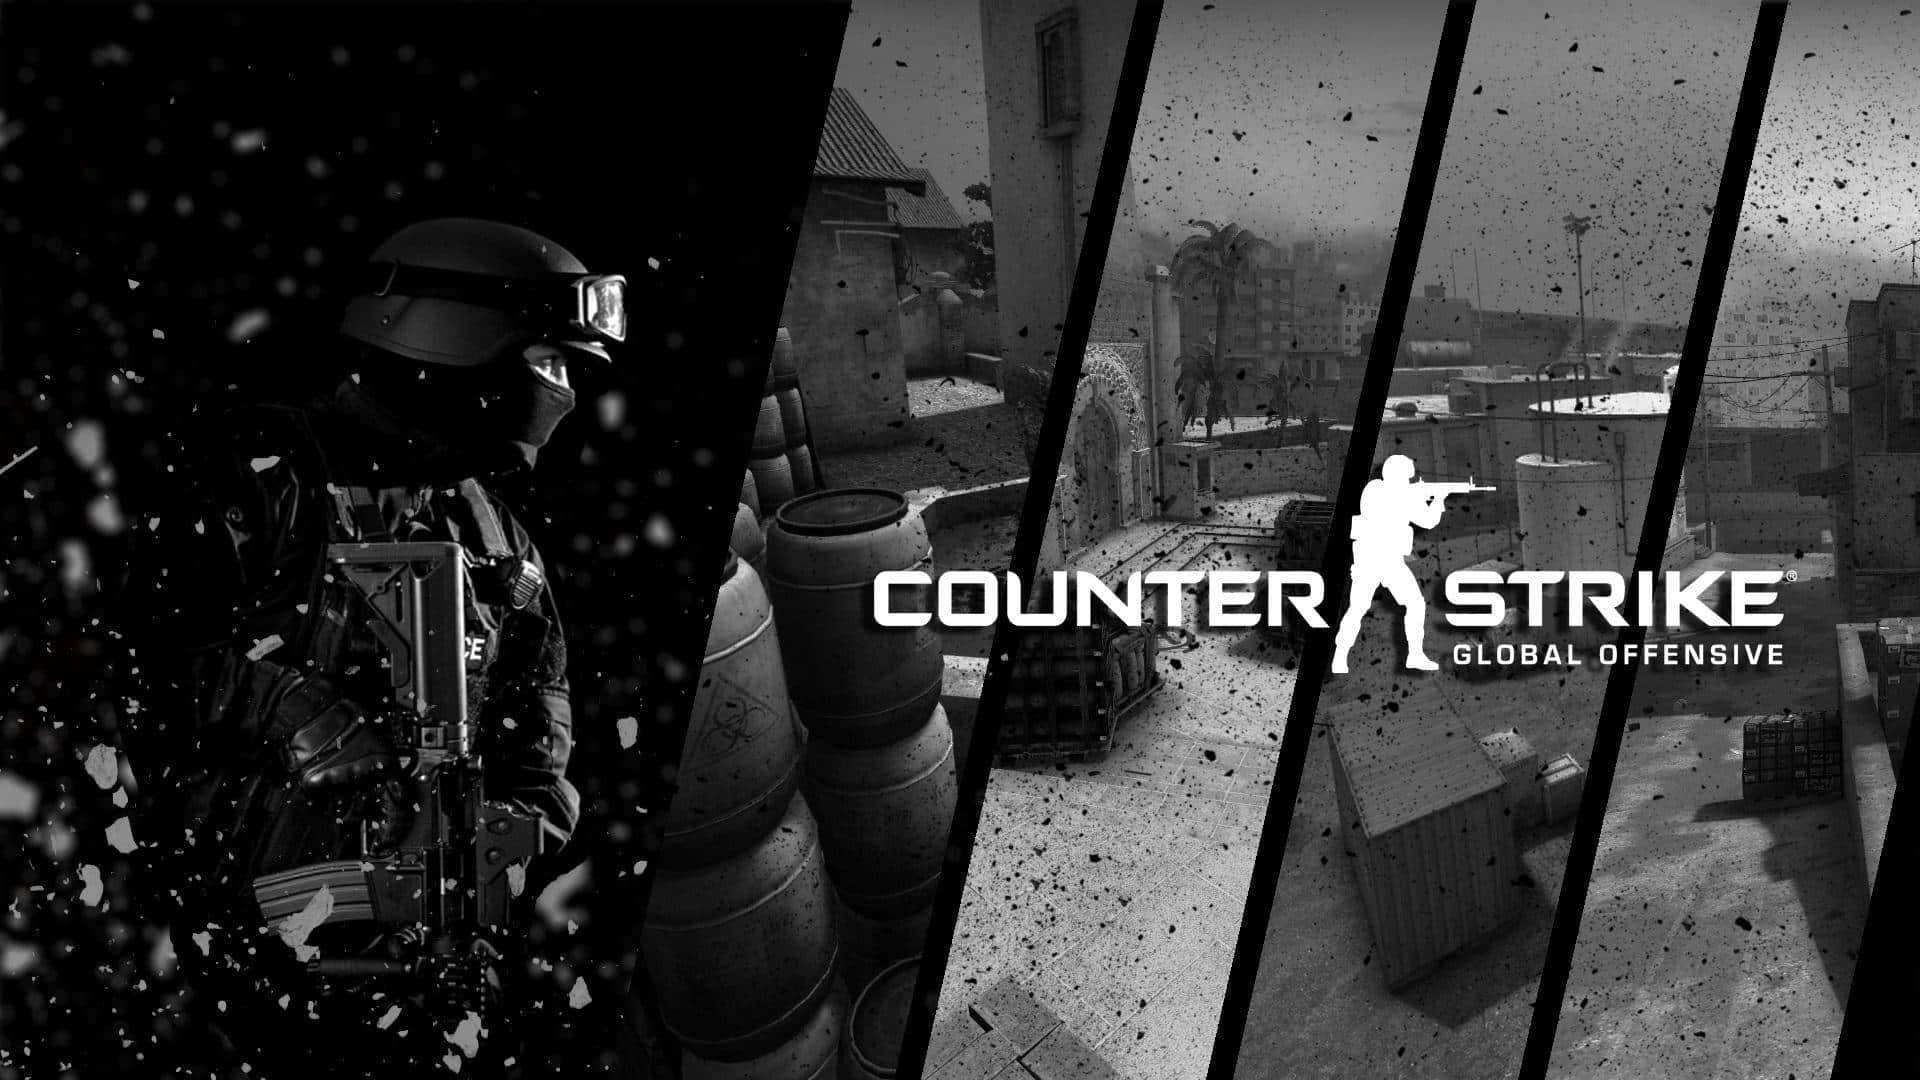 Monochrome 1080p Counter Strike Global Offensive Background Illustration